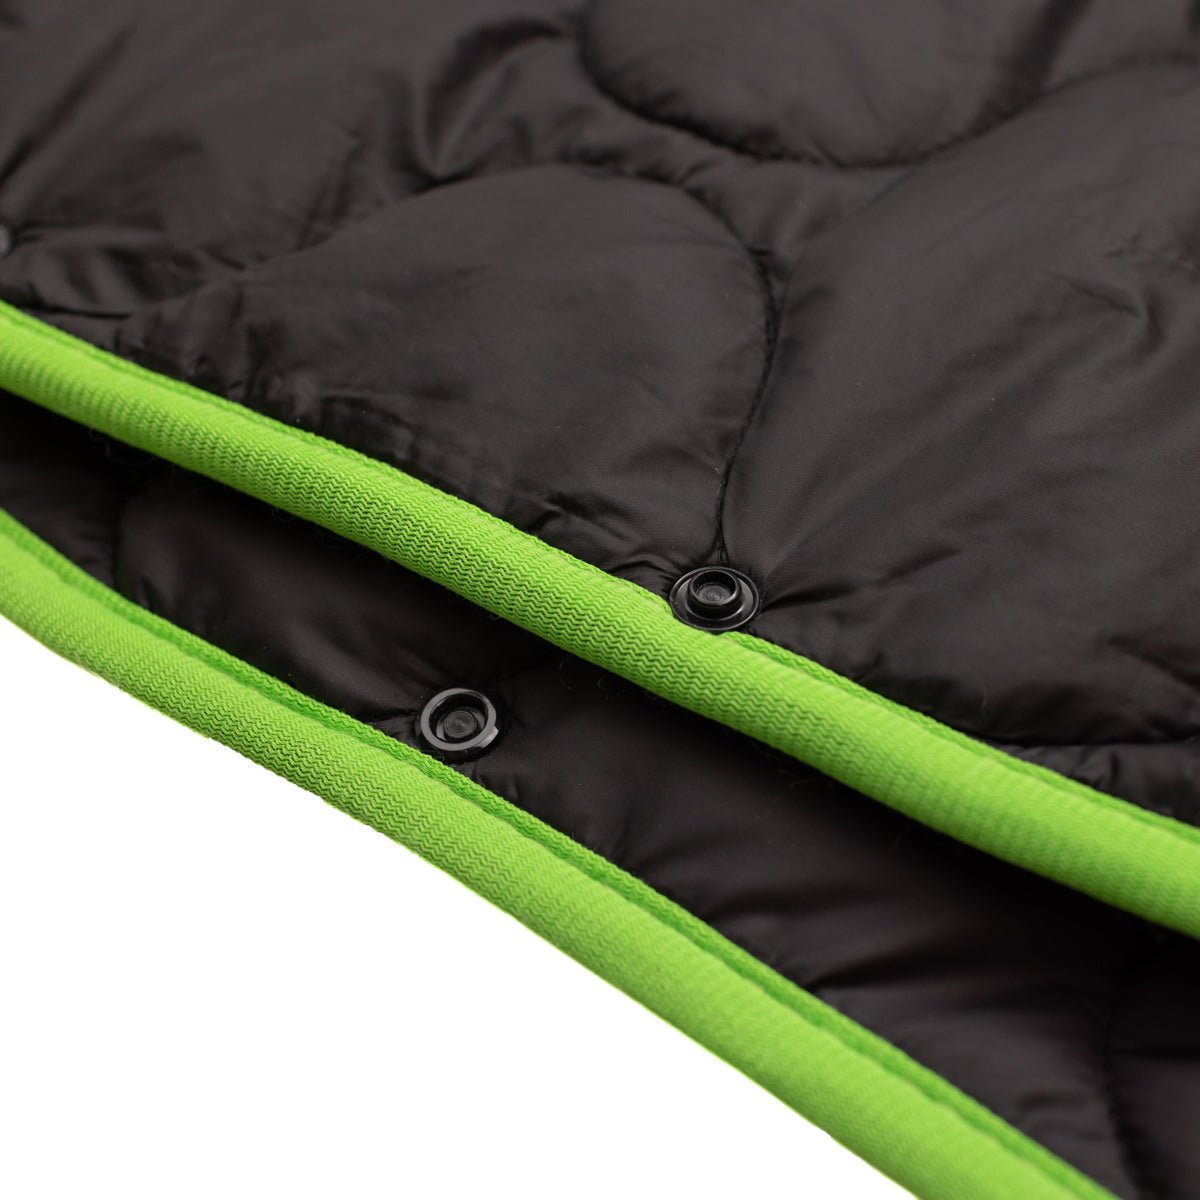 Puffy Camping Blanket - Groove Rabbit